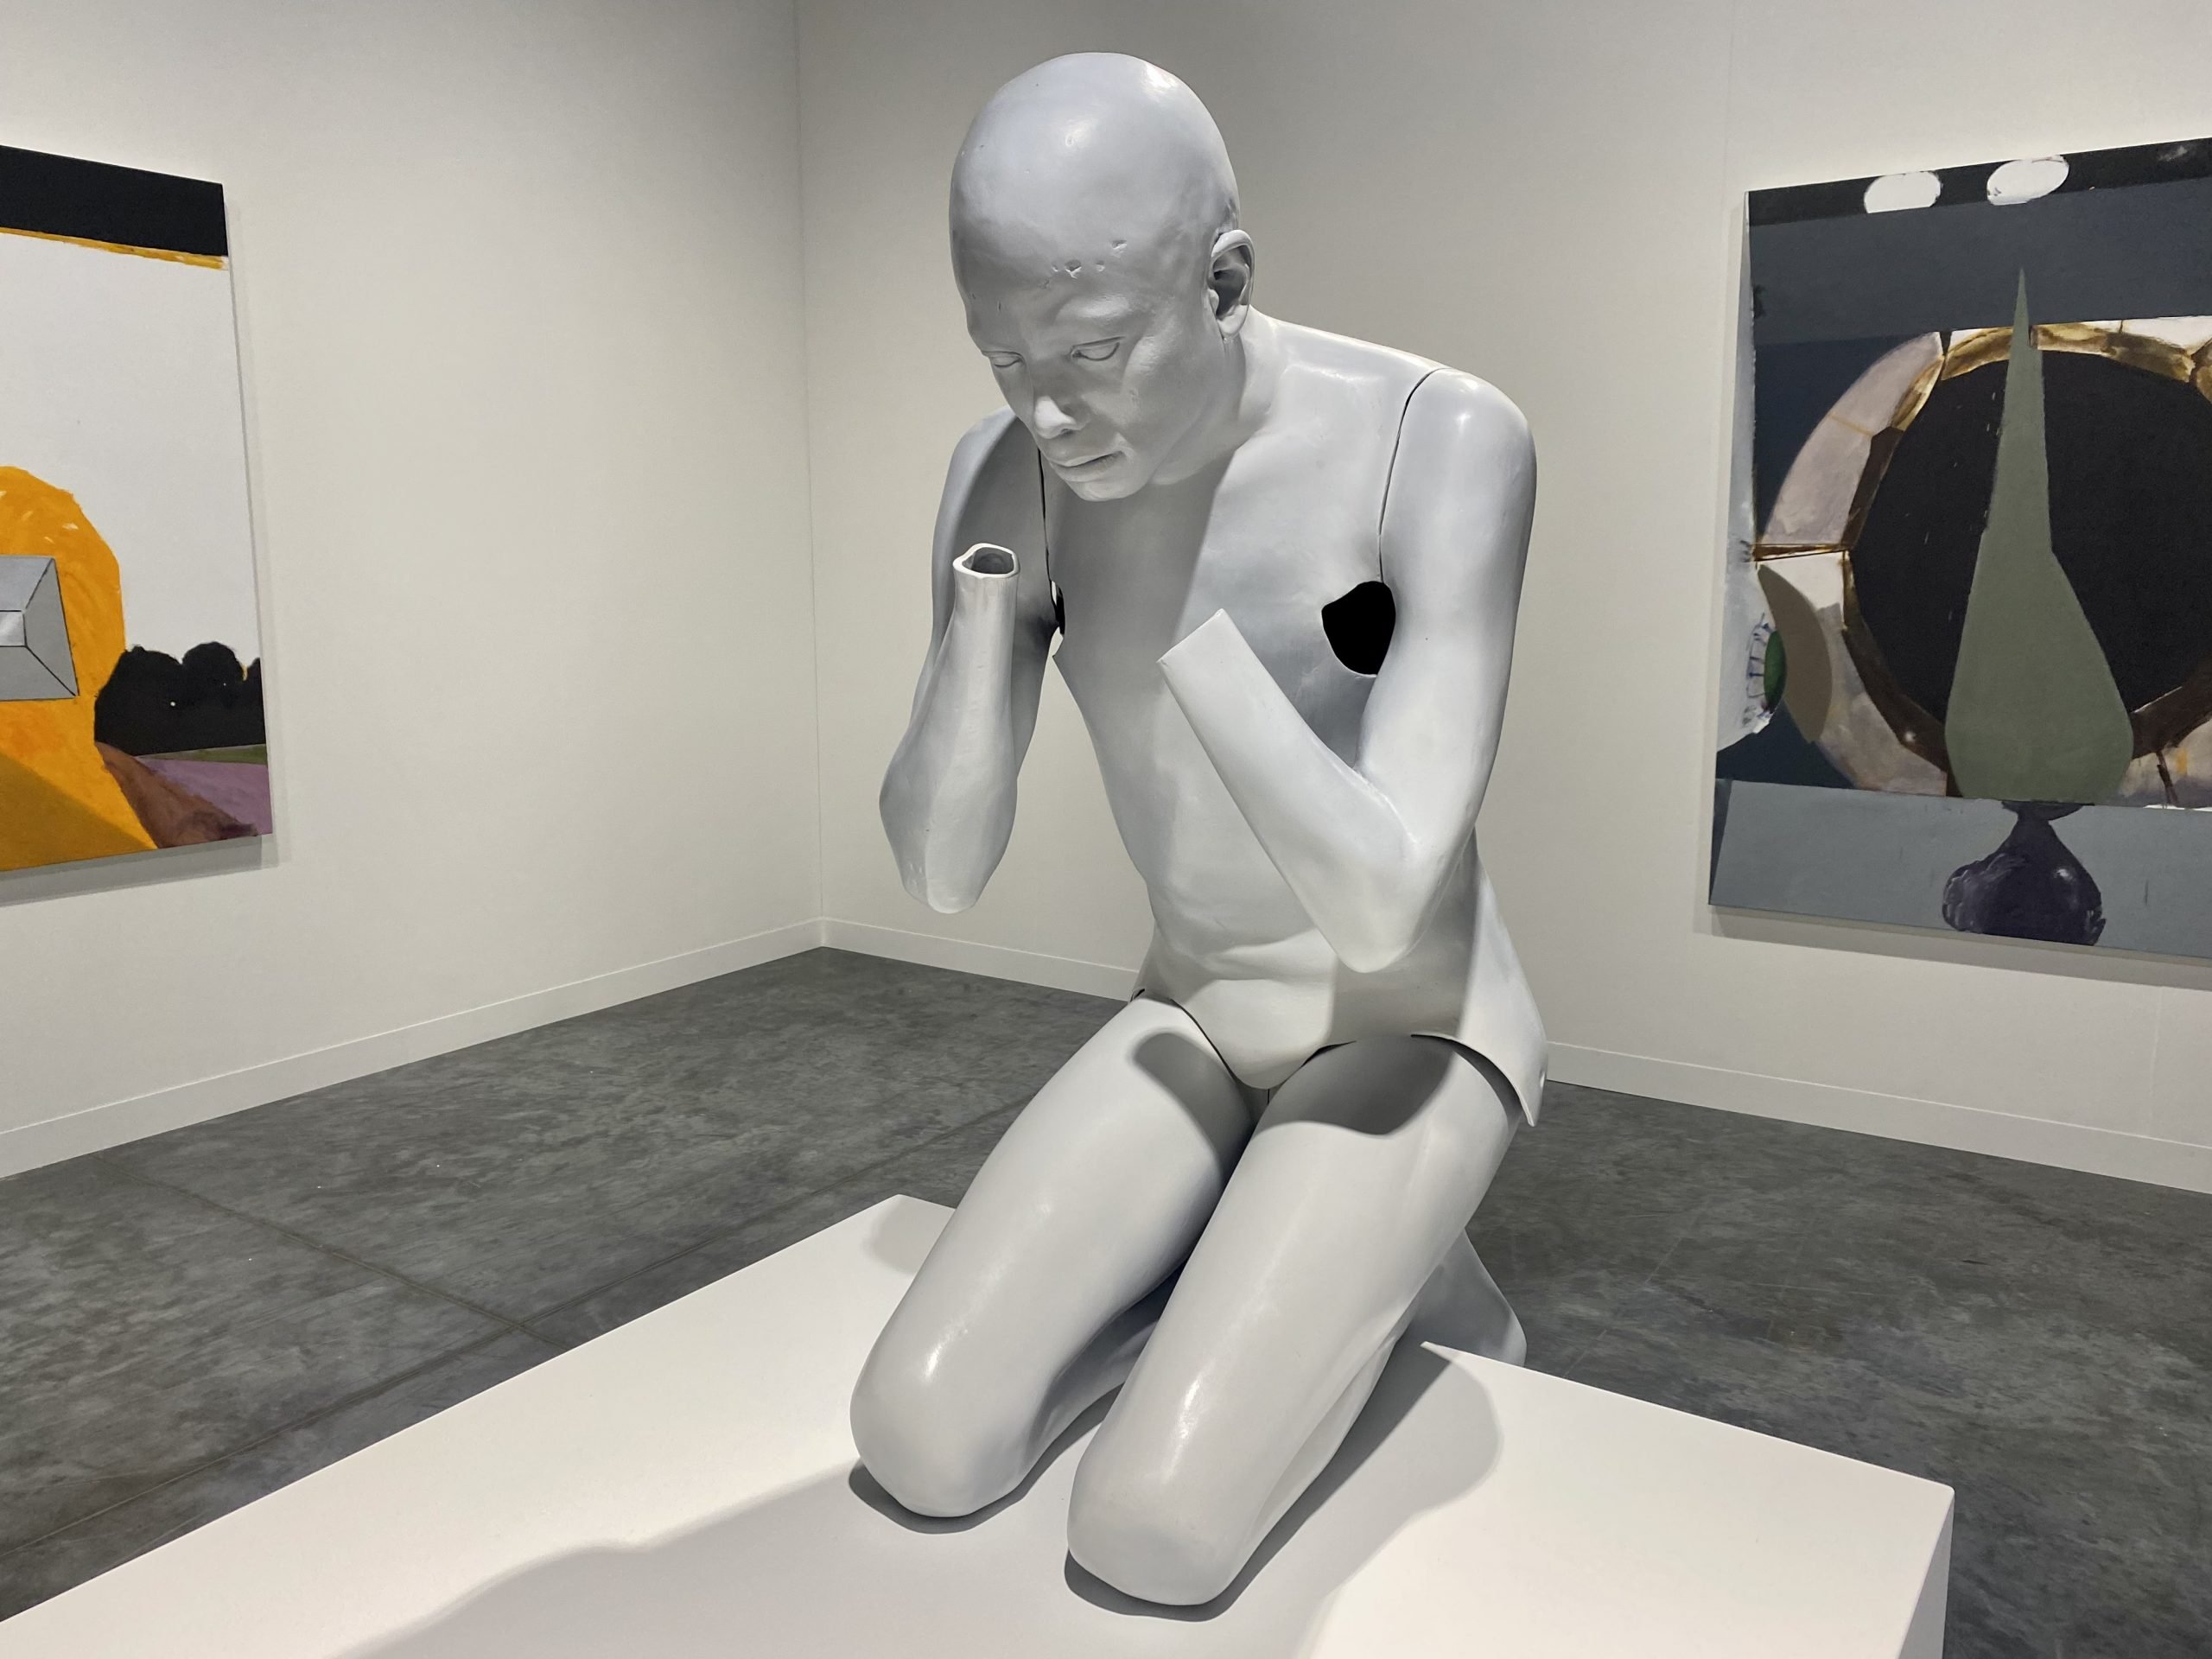 How a 1986 Cast of Michael Jackson's Body Became a Spine-Tinglingly Creepy  Sculpture at Art Basel Miami Beach